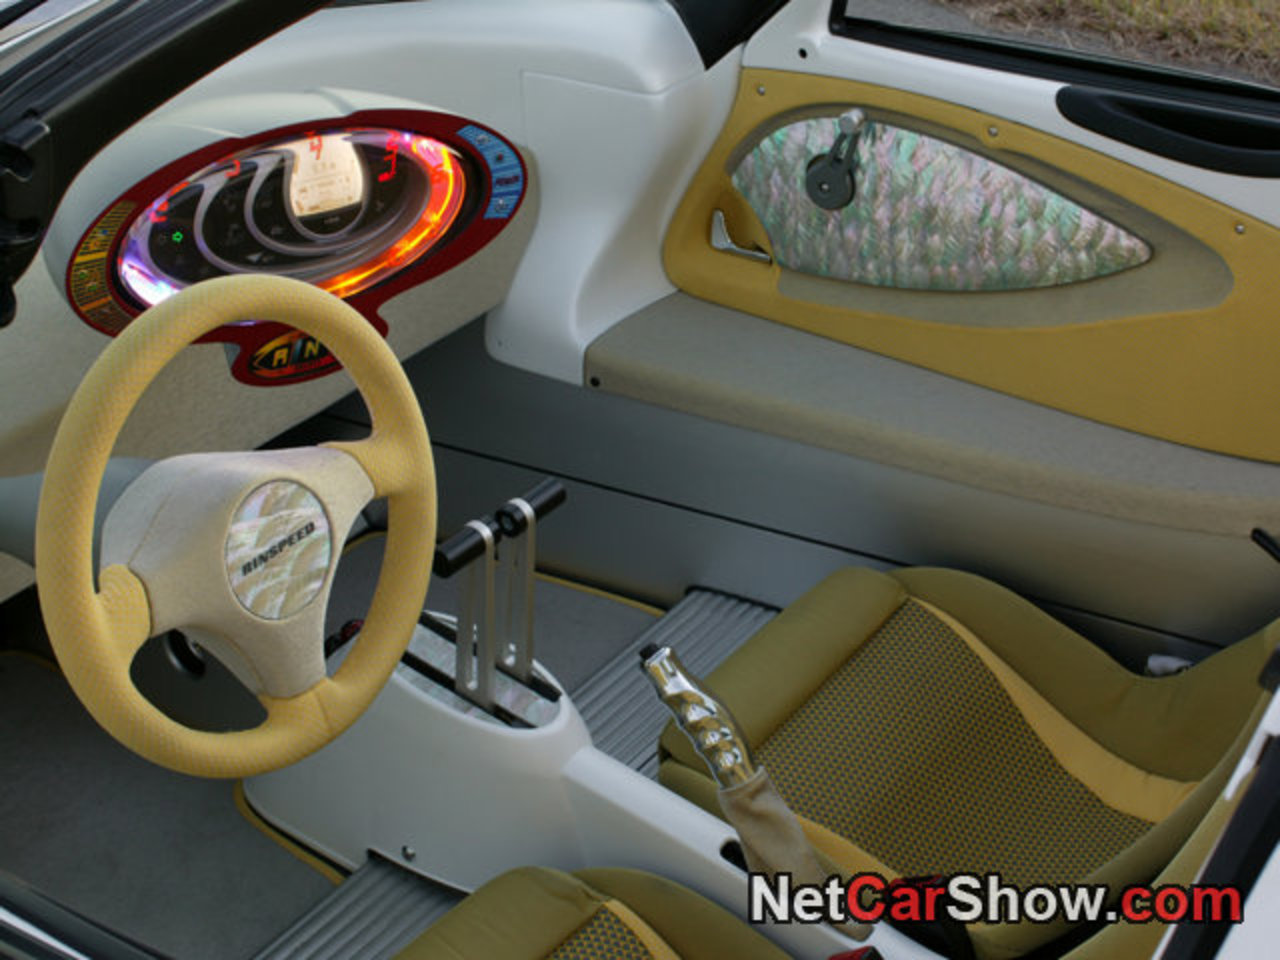 Rinspeed sQuba Concept picture # 42 of 70, Interior, MY 2008, 800x600